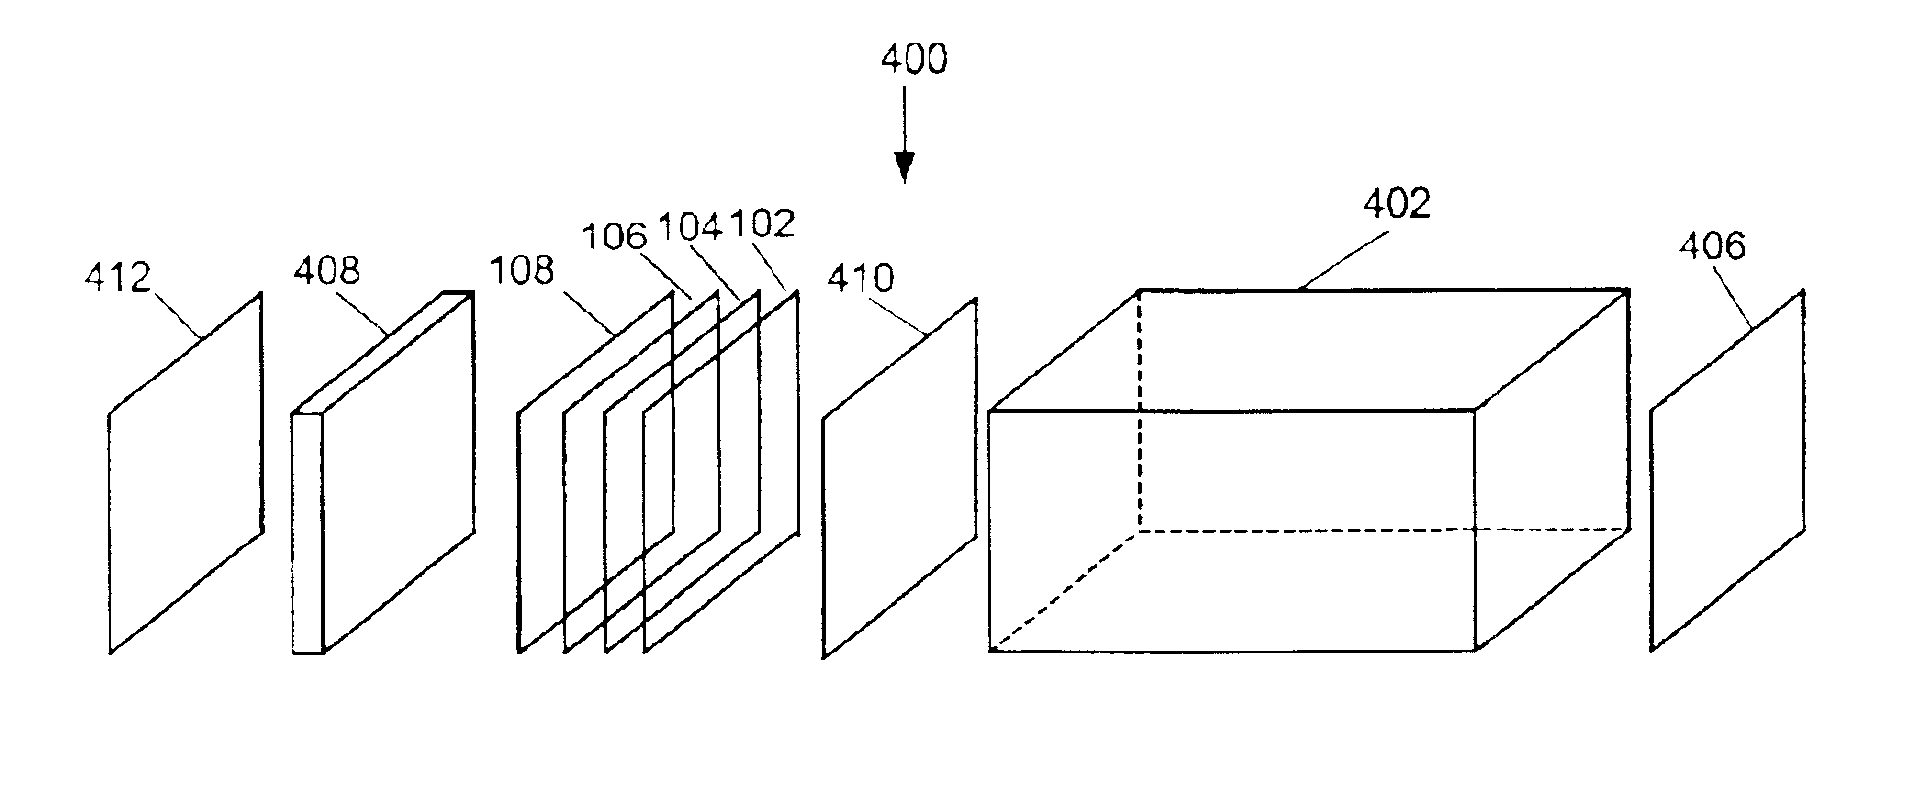 Non-inverting transflective assembly